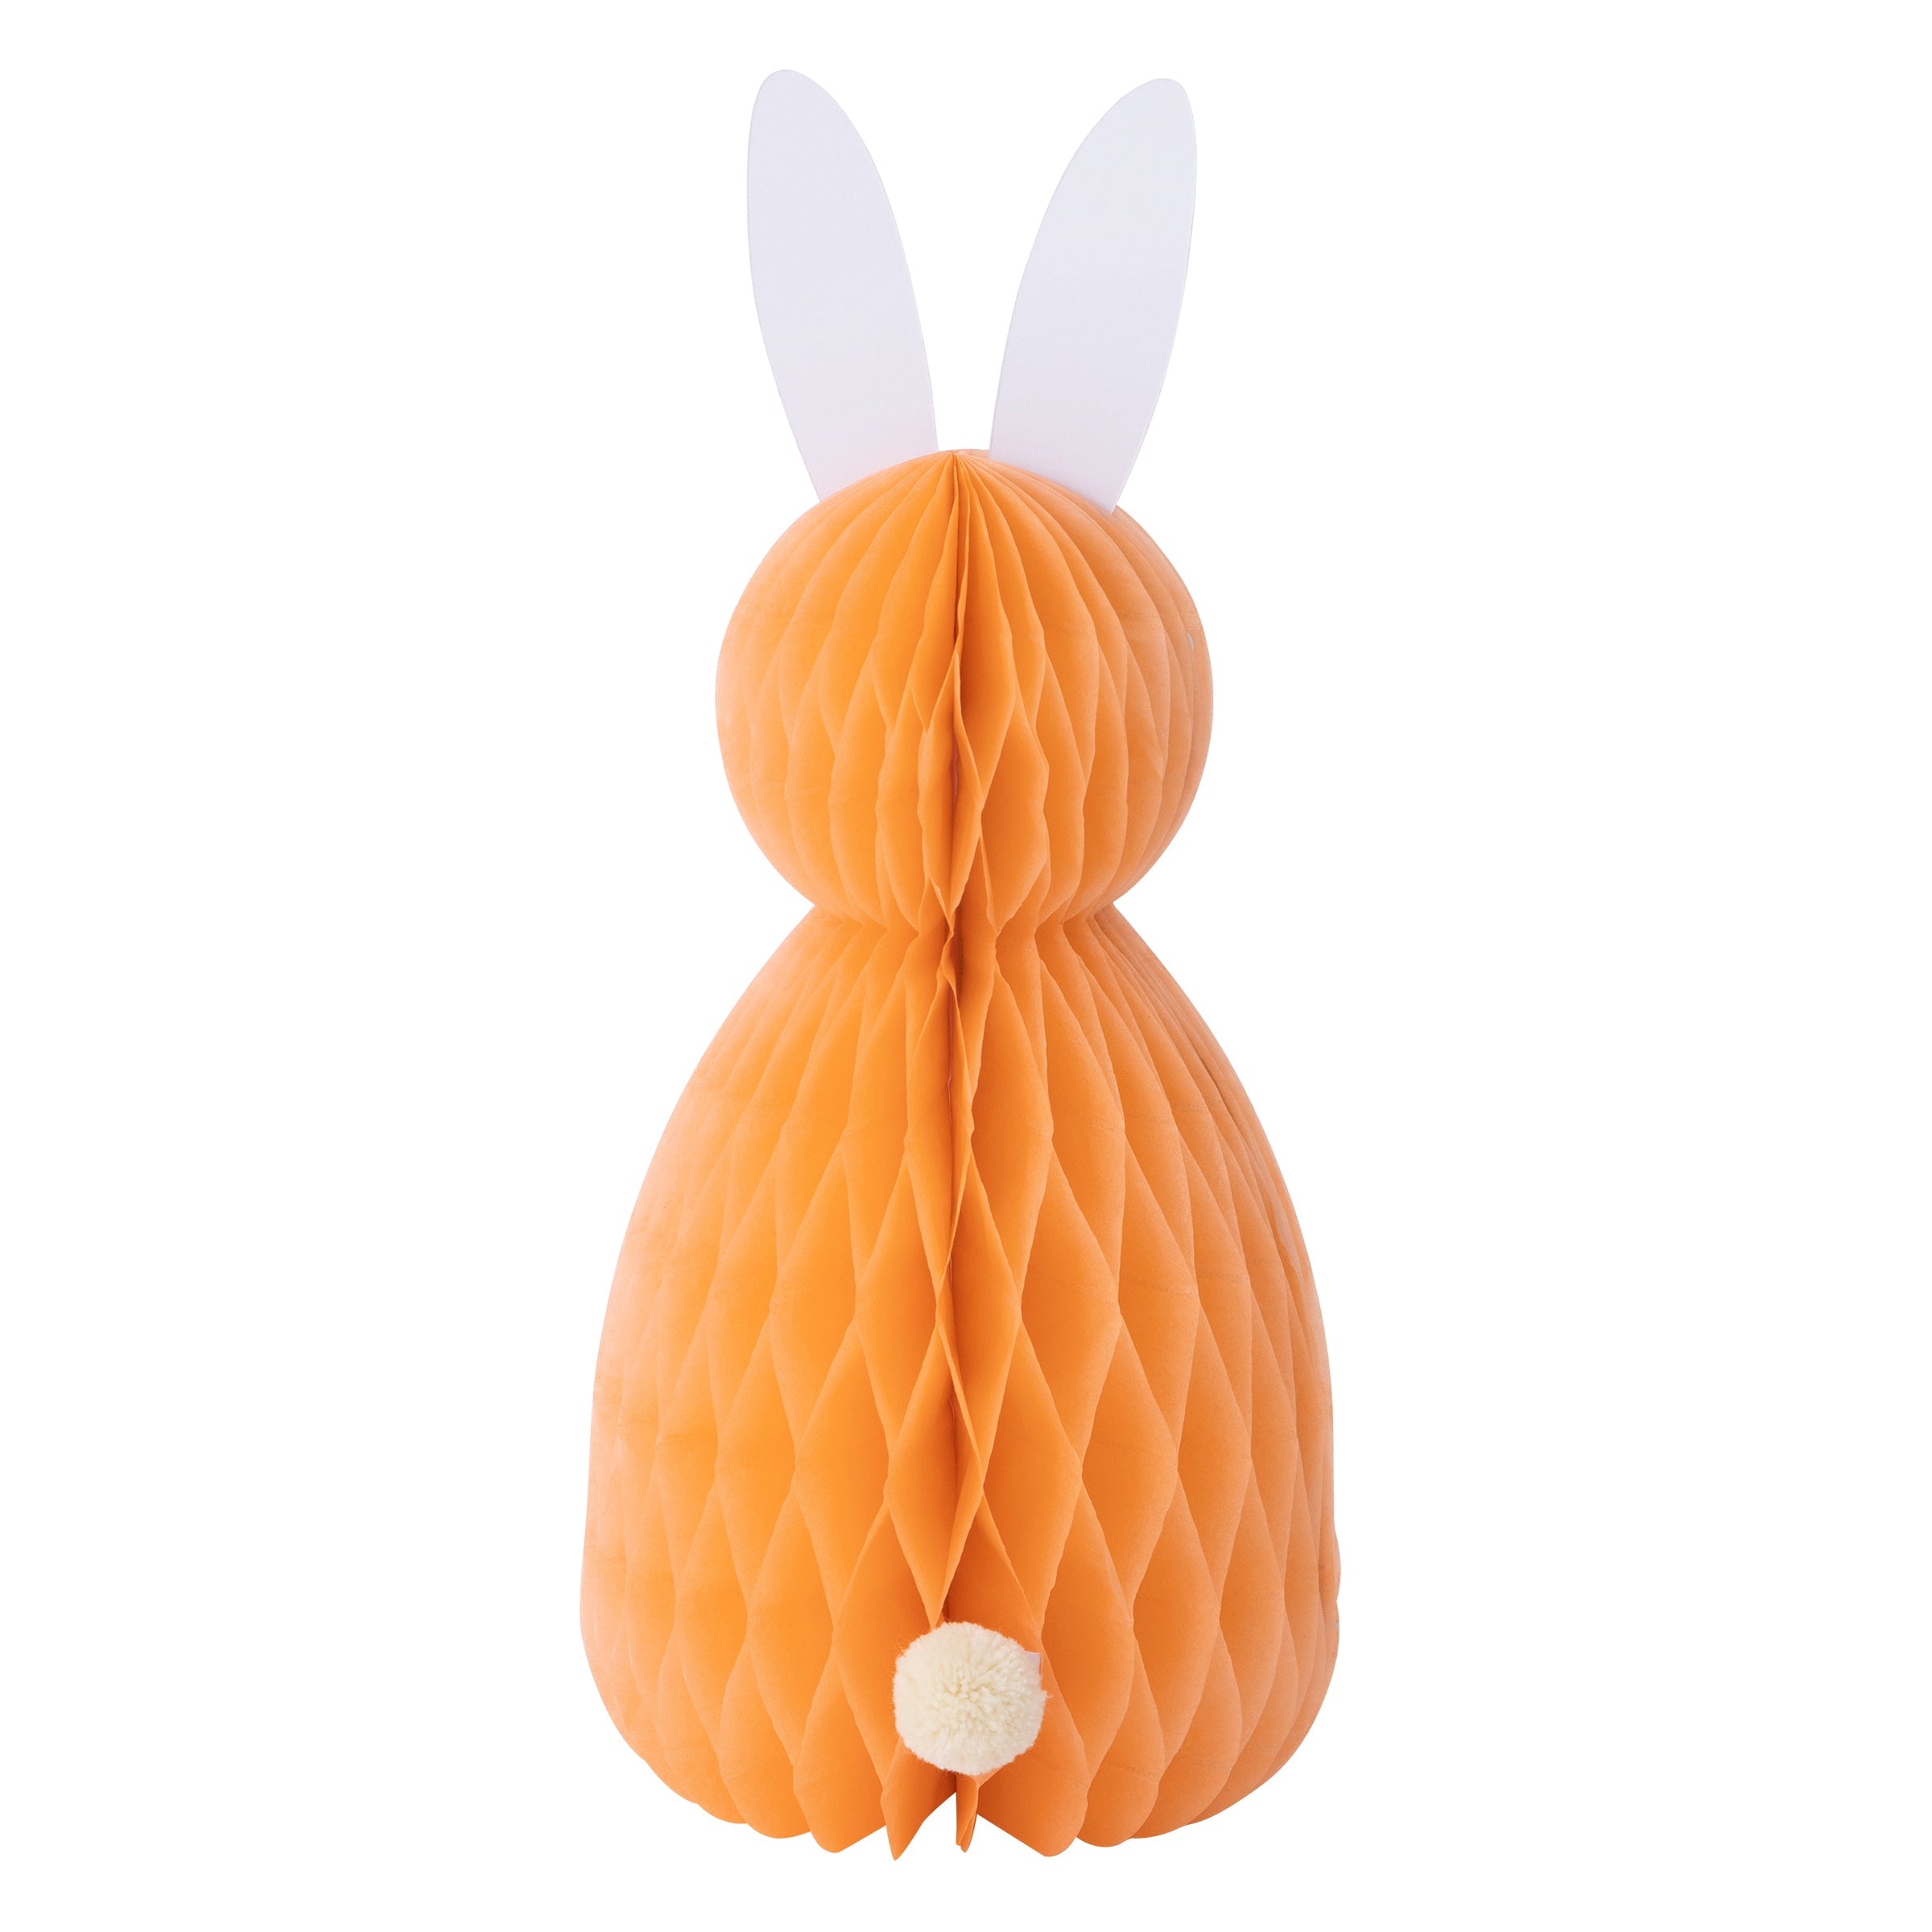 Our honeycomb decorations with chick decorations, bunny decorations and Easter egg decorations, are perfect for an Easter party.